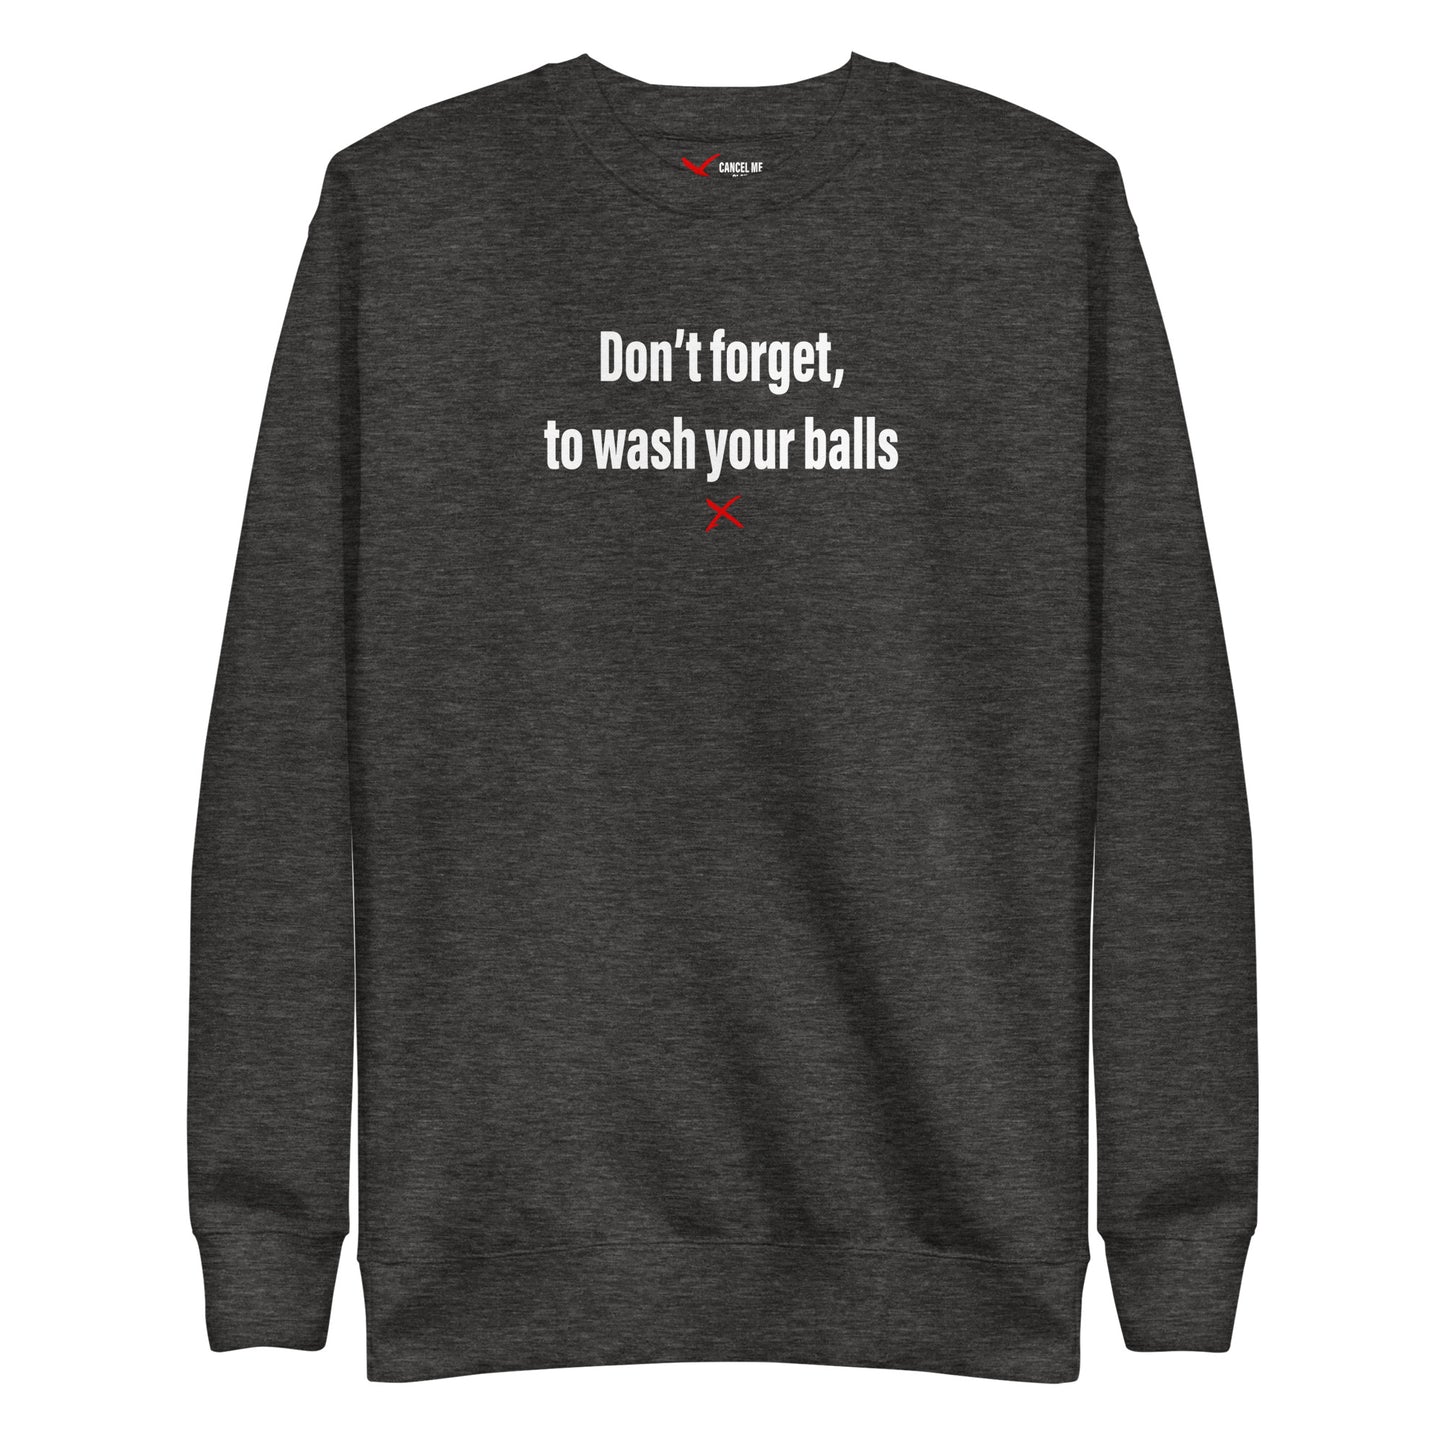 Don't forget, to wash your balls - Sweatshirt